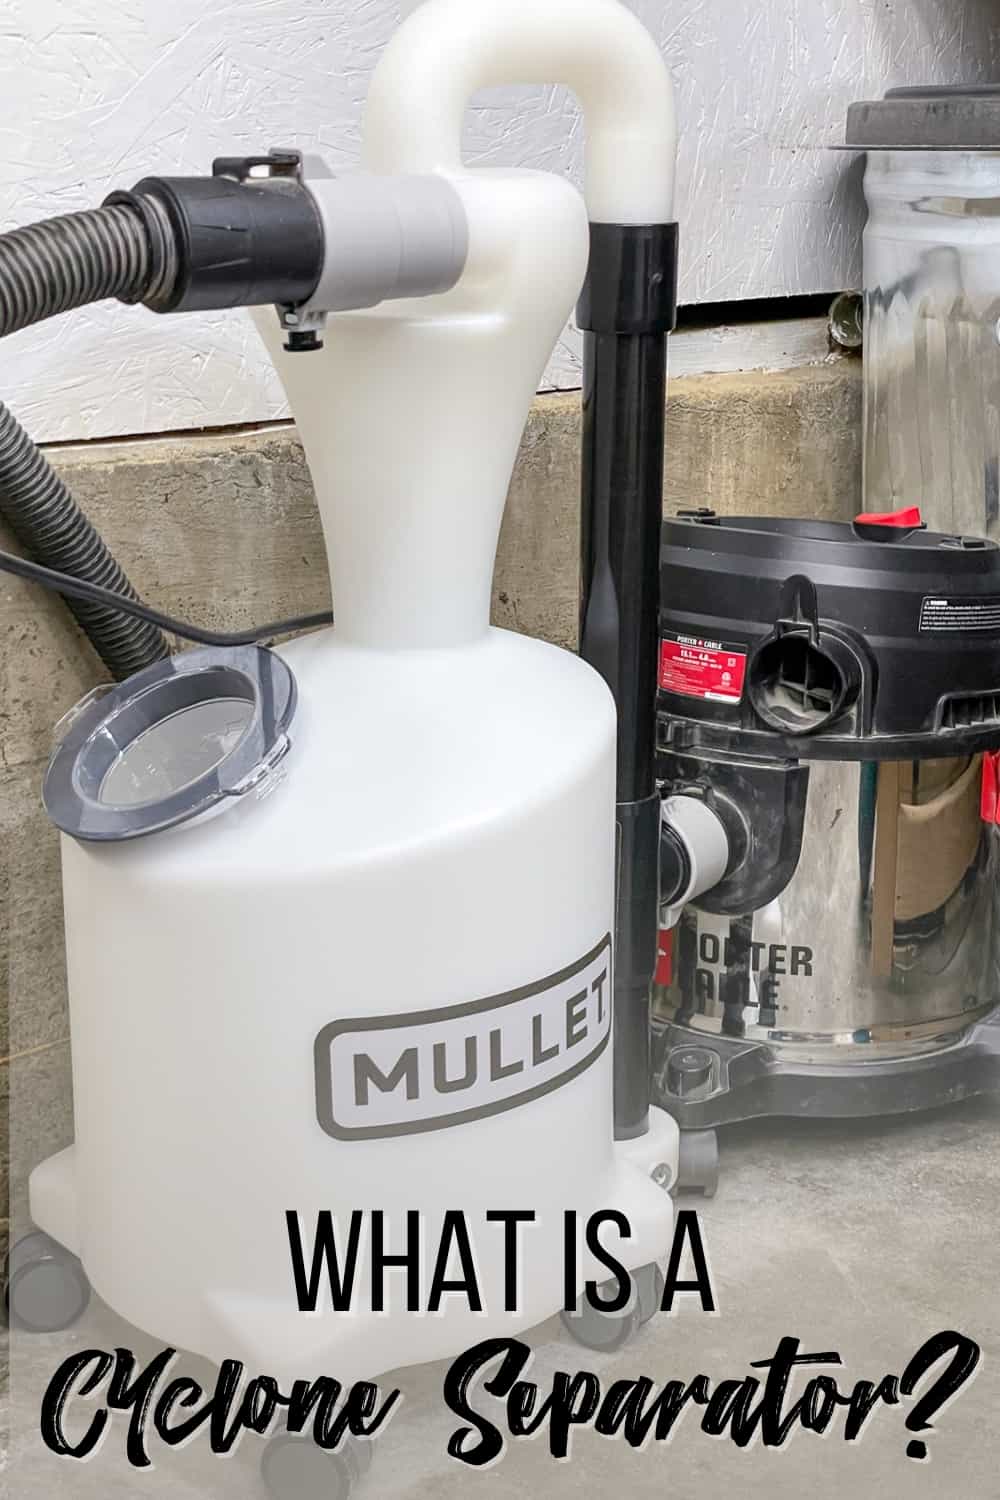 Mullet cyclone dust separator connected to shop vac